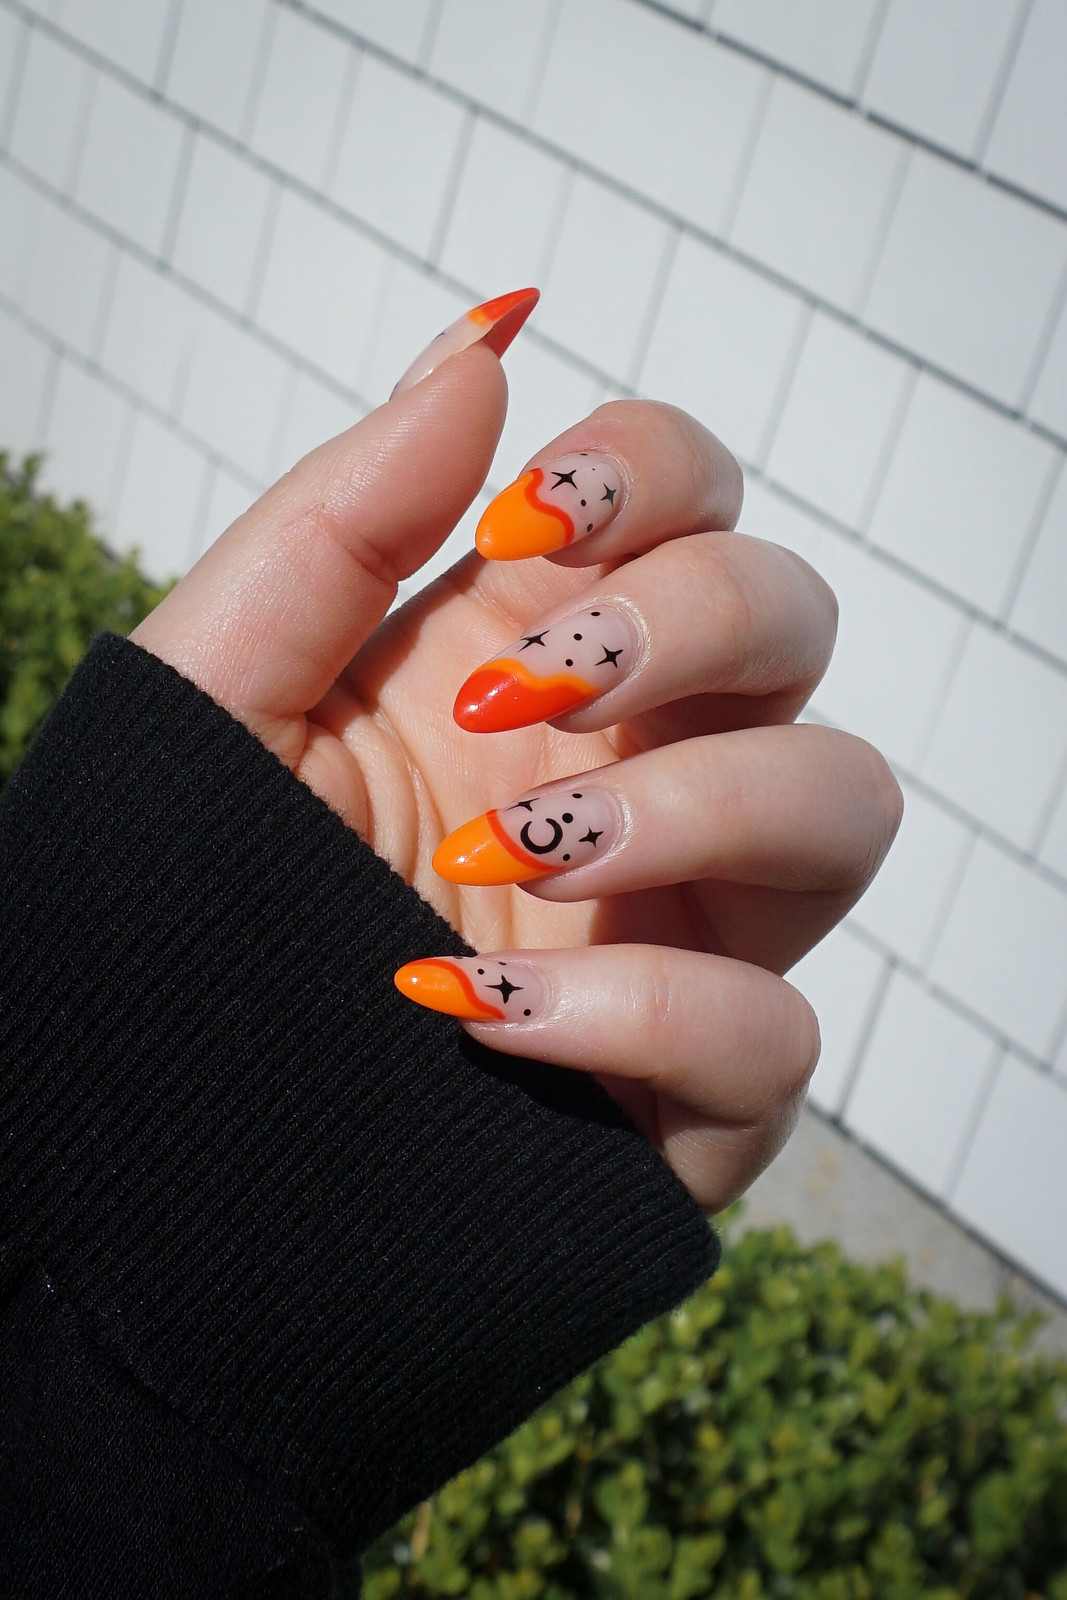 Neon Orange French Manicure with Stars | Best Halloween Nails | Trendy Nails | Halloween Nail Art | Acrylic Nails | October Nails | Spooky Nails | Manicure Ideas | Fall Nails 2022 | Halloween Nail Designs | Autumn Nails | Pretty Halloween Nails